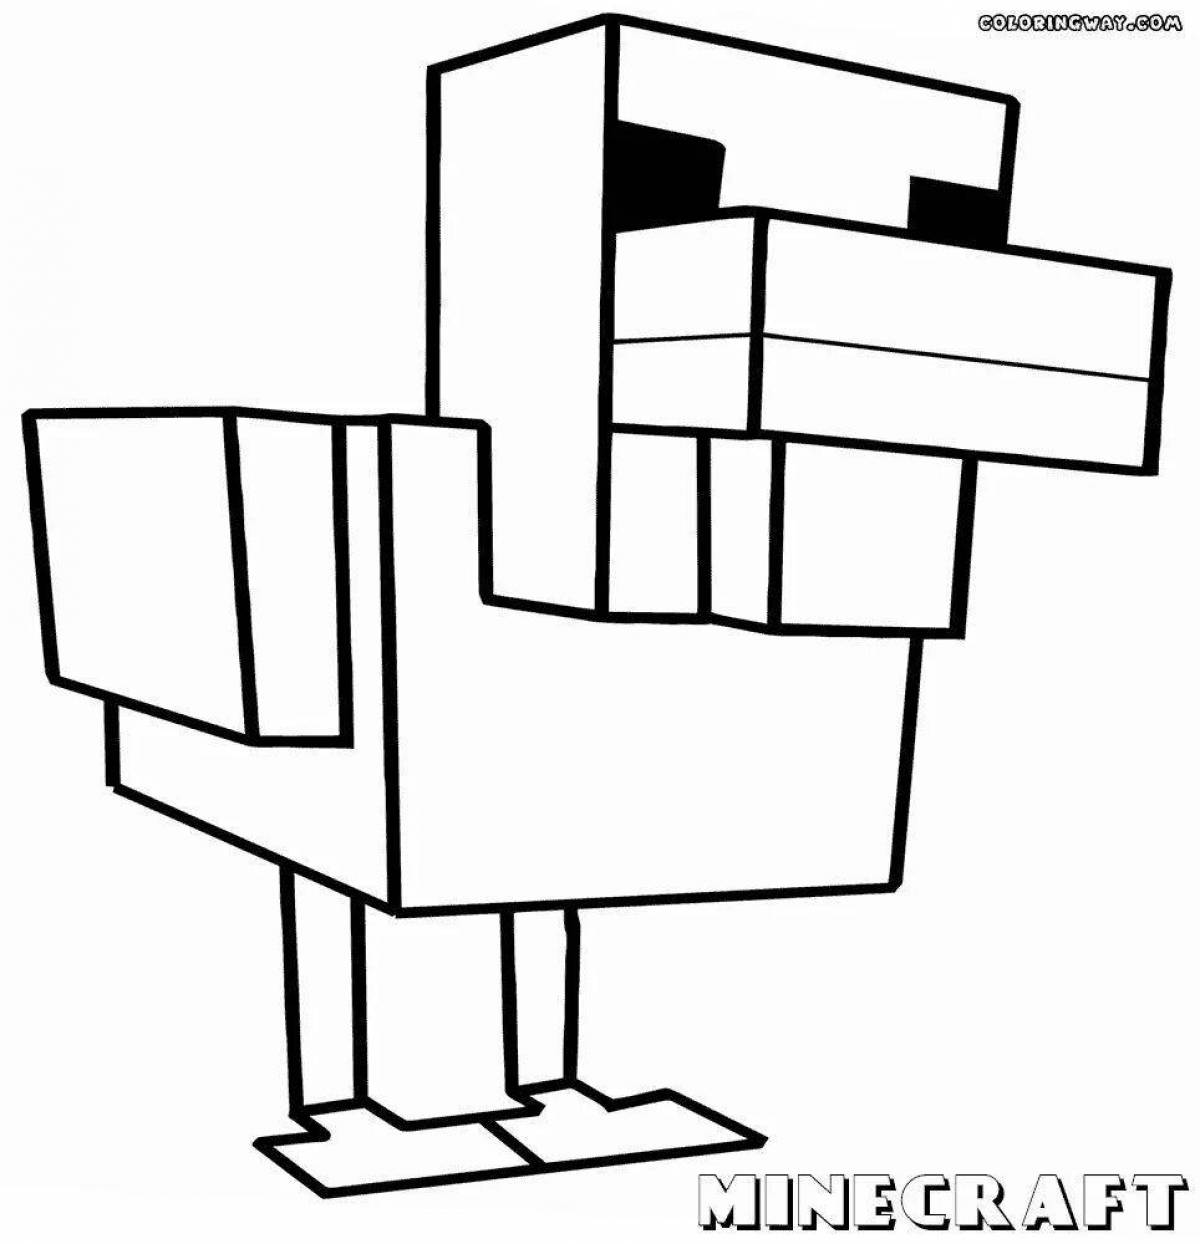 Fun minecraft cat coloring page